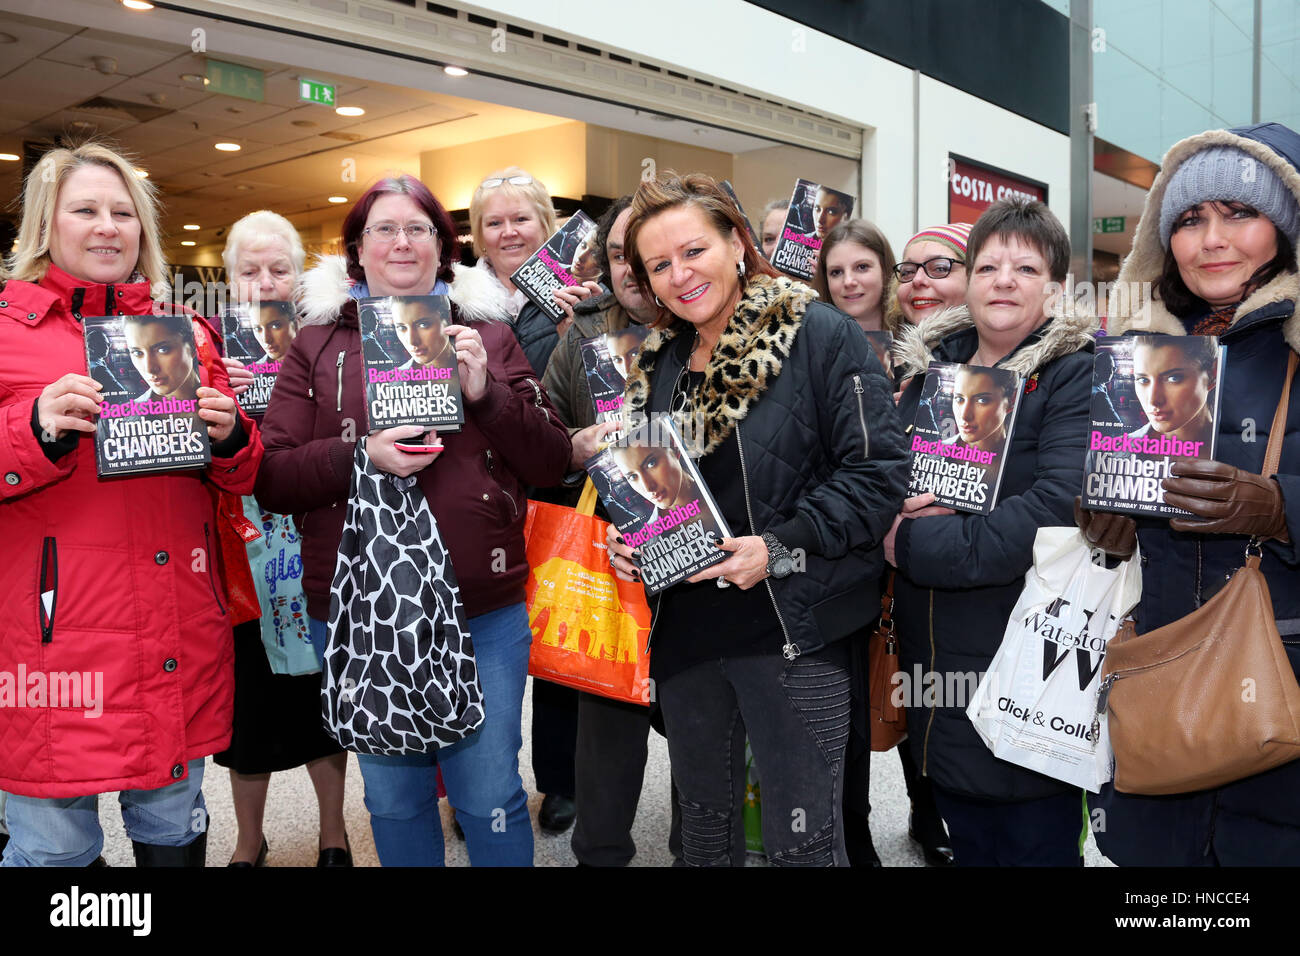 Romford, Essex, UK. 11 Feb, 2017. crime author Kimberley Chambers signs copies of her latest thriller Backstabber at Waterstones bookshop Romford Essex 11/2/17 Credit: SANDRA ROWSE/Alamy Live News Stock Photo